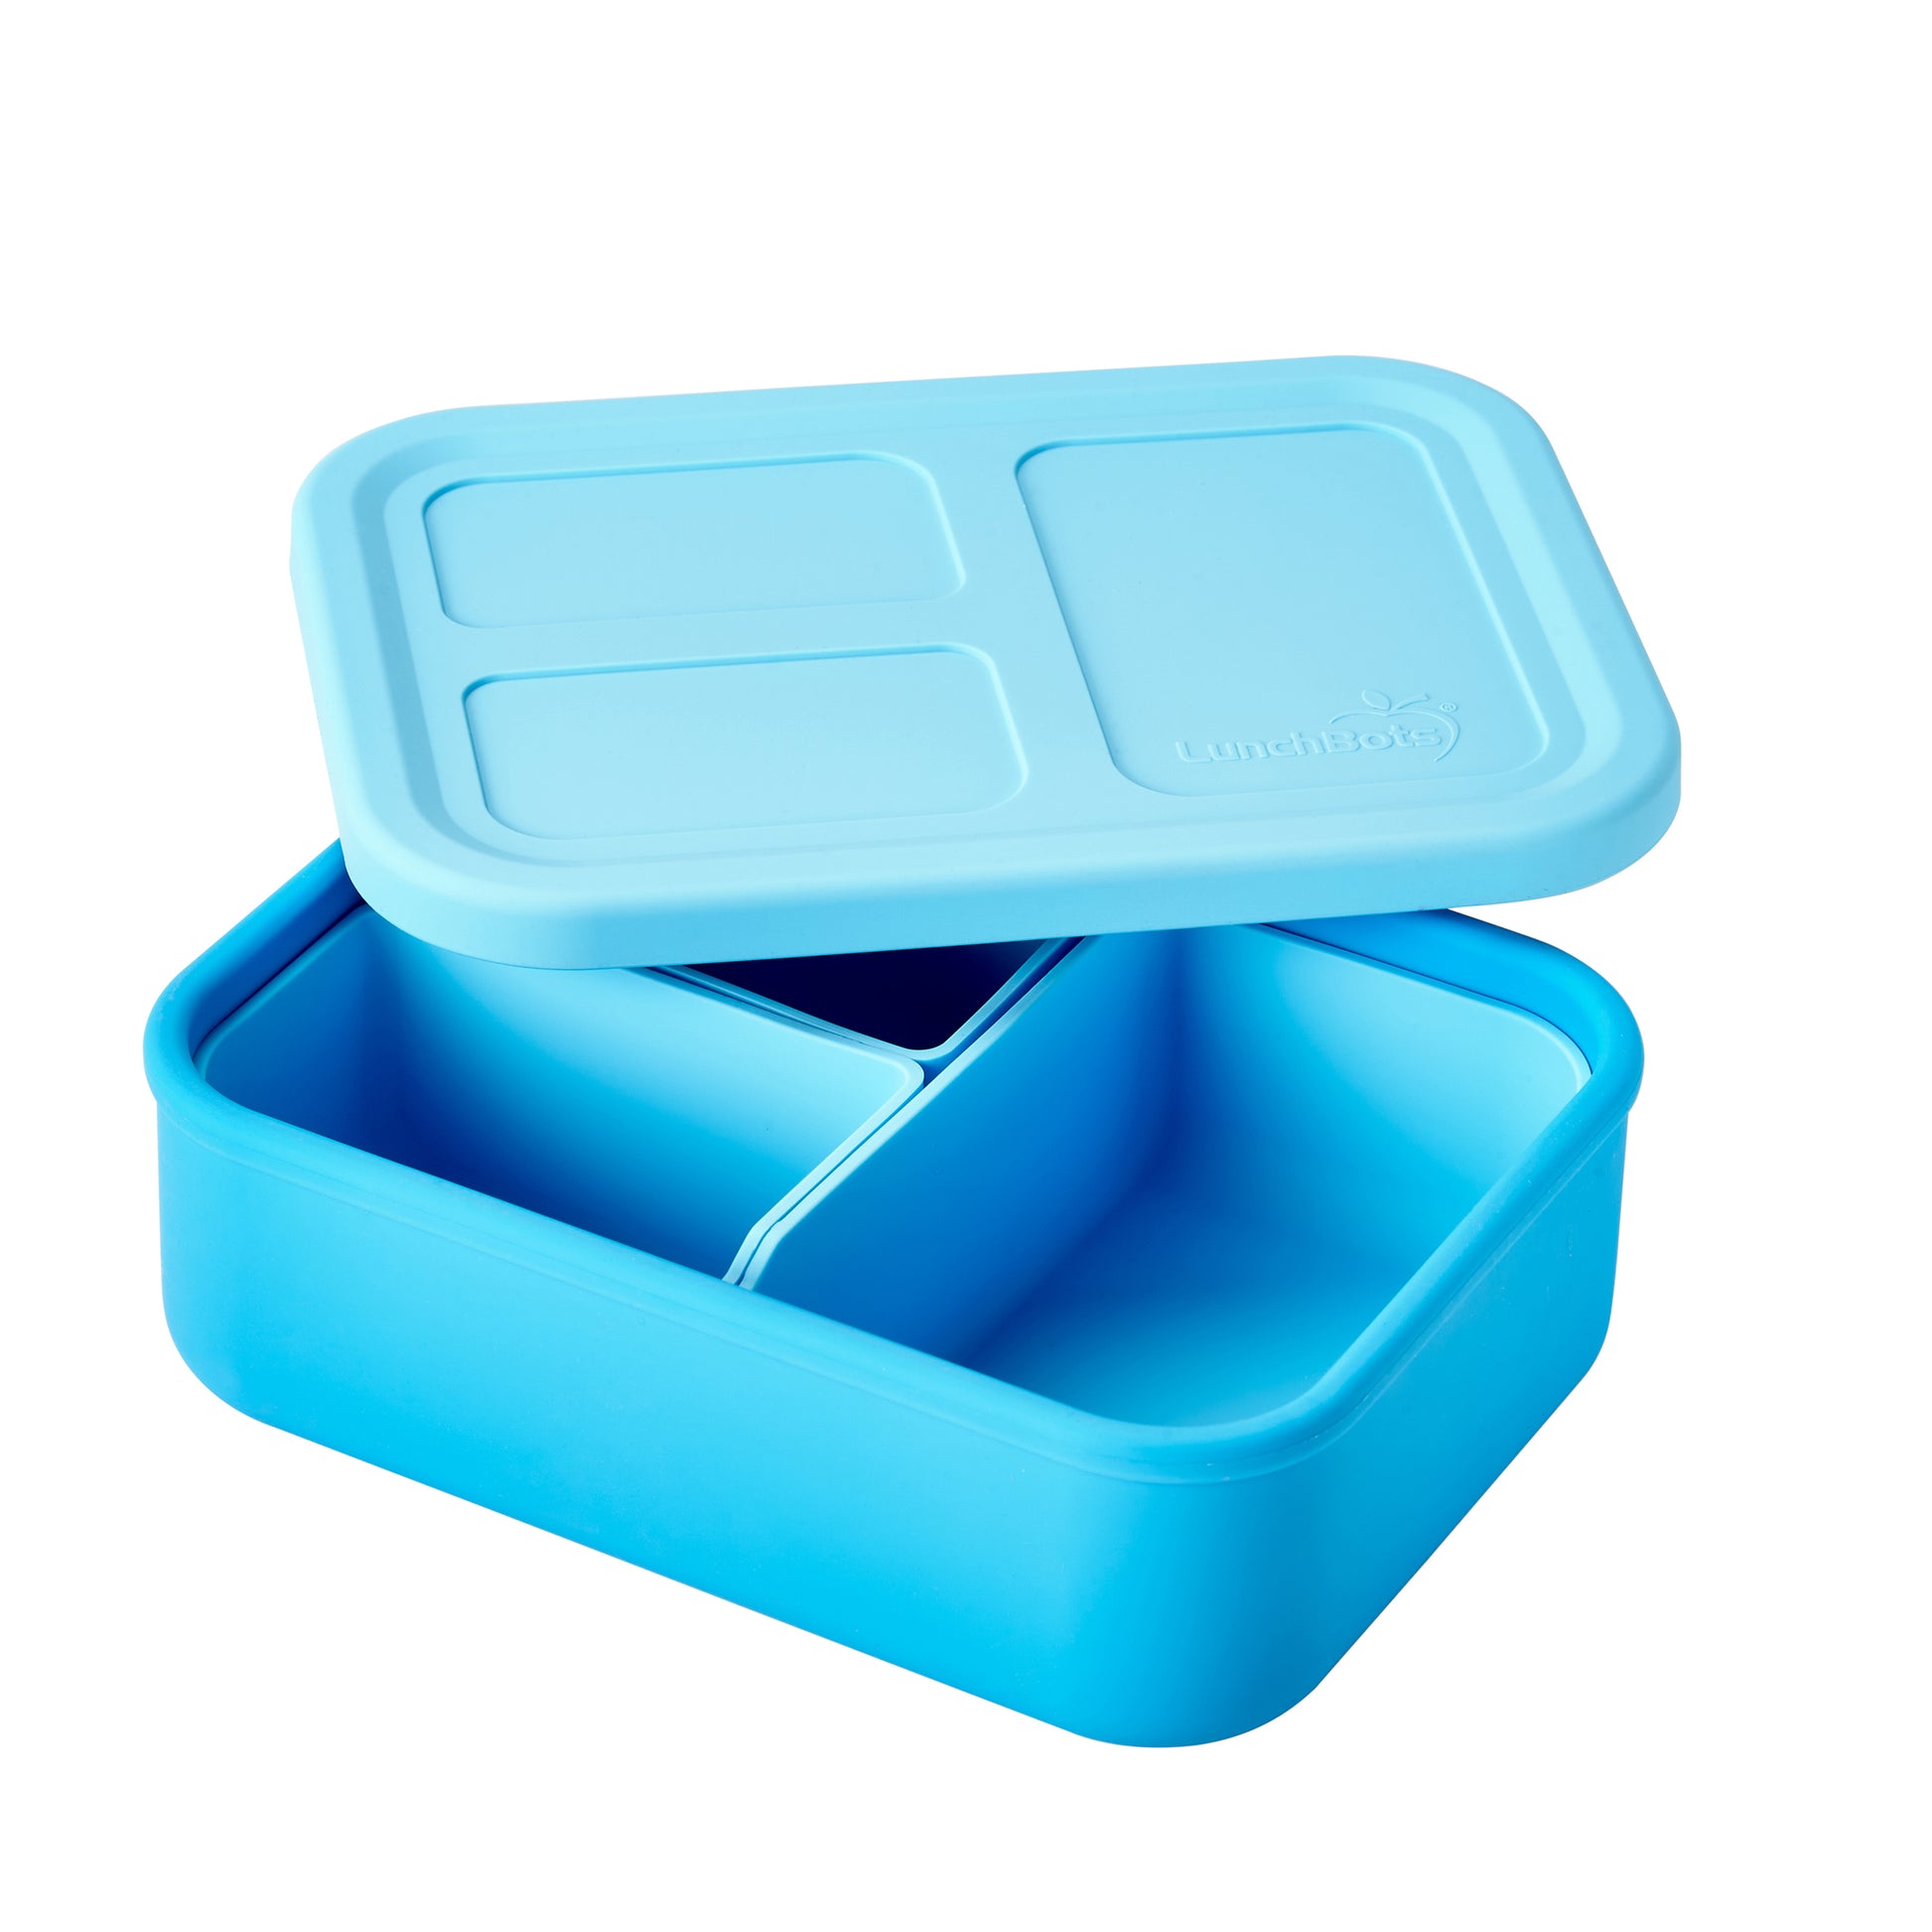 Lunchbots Medium Uno Food Storage Container : Target